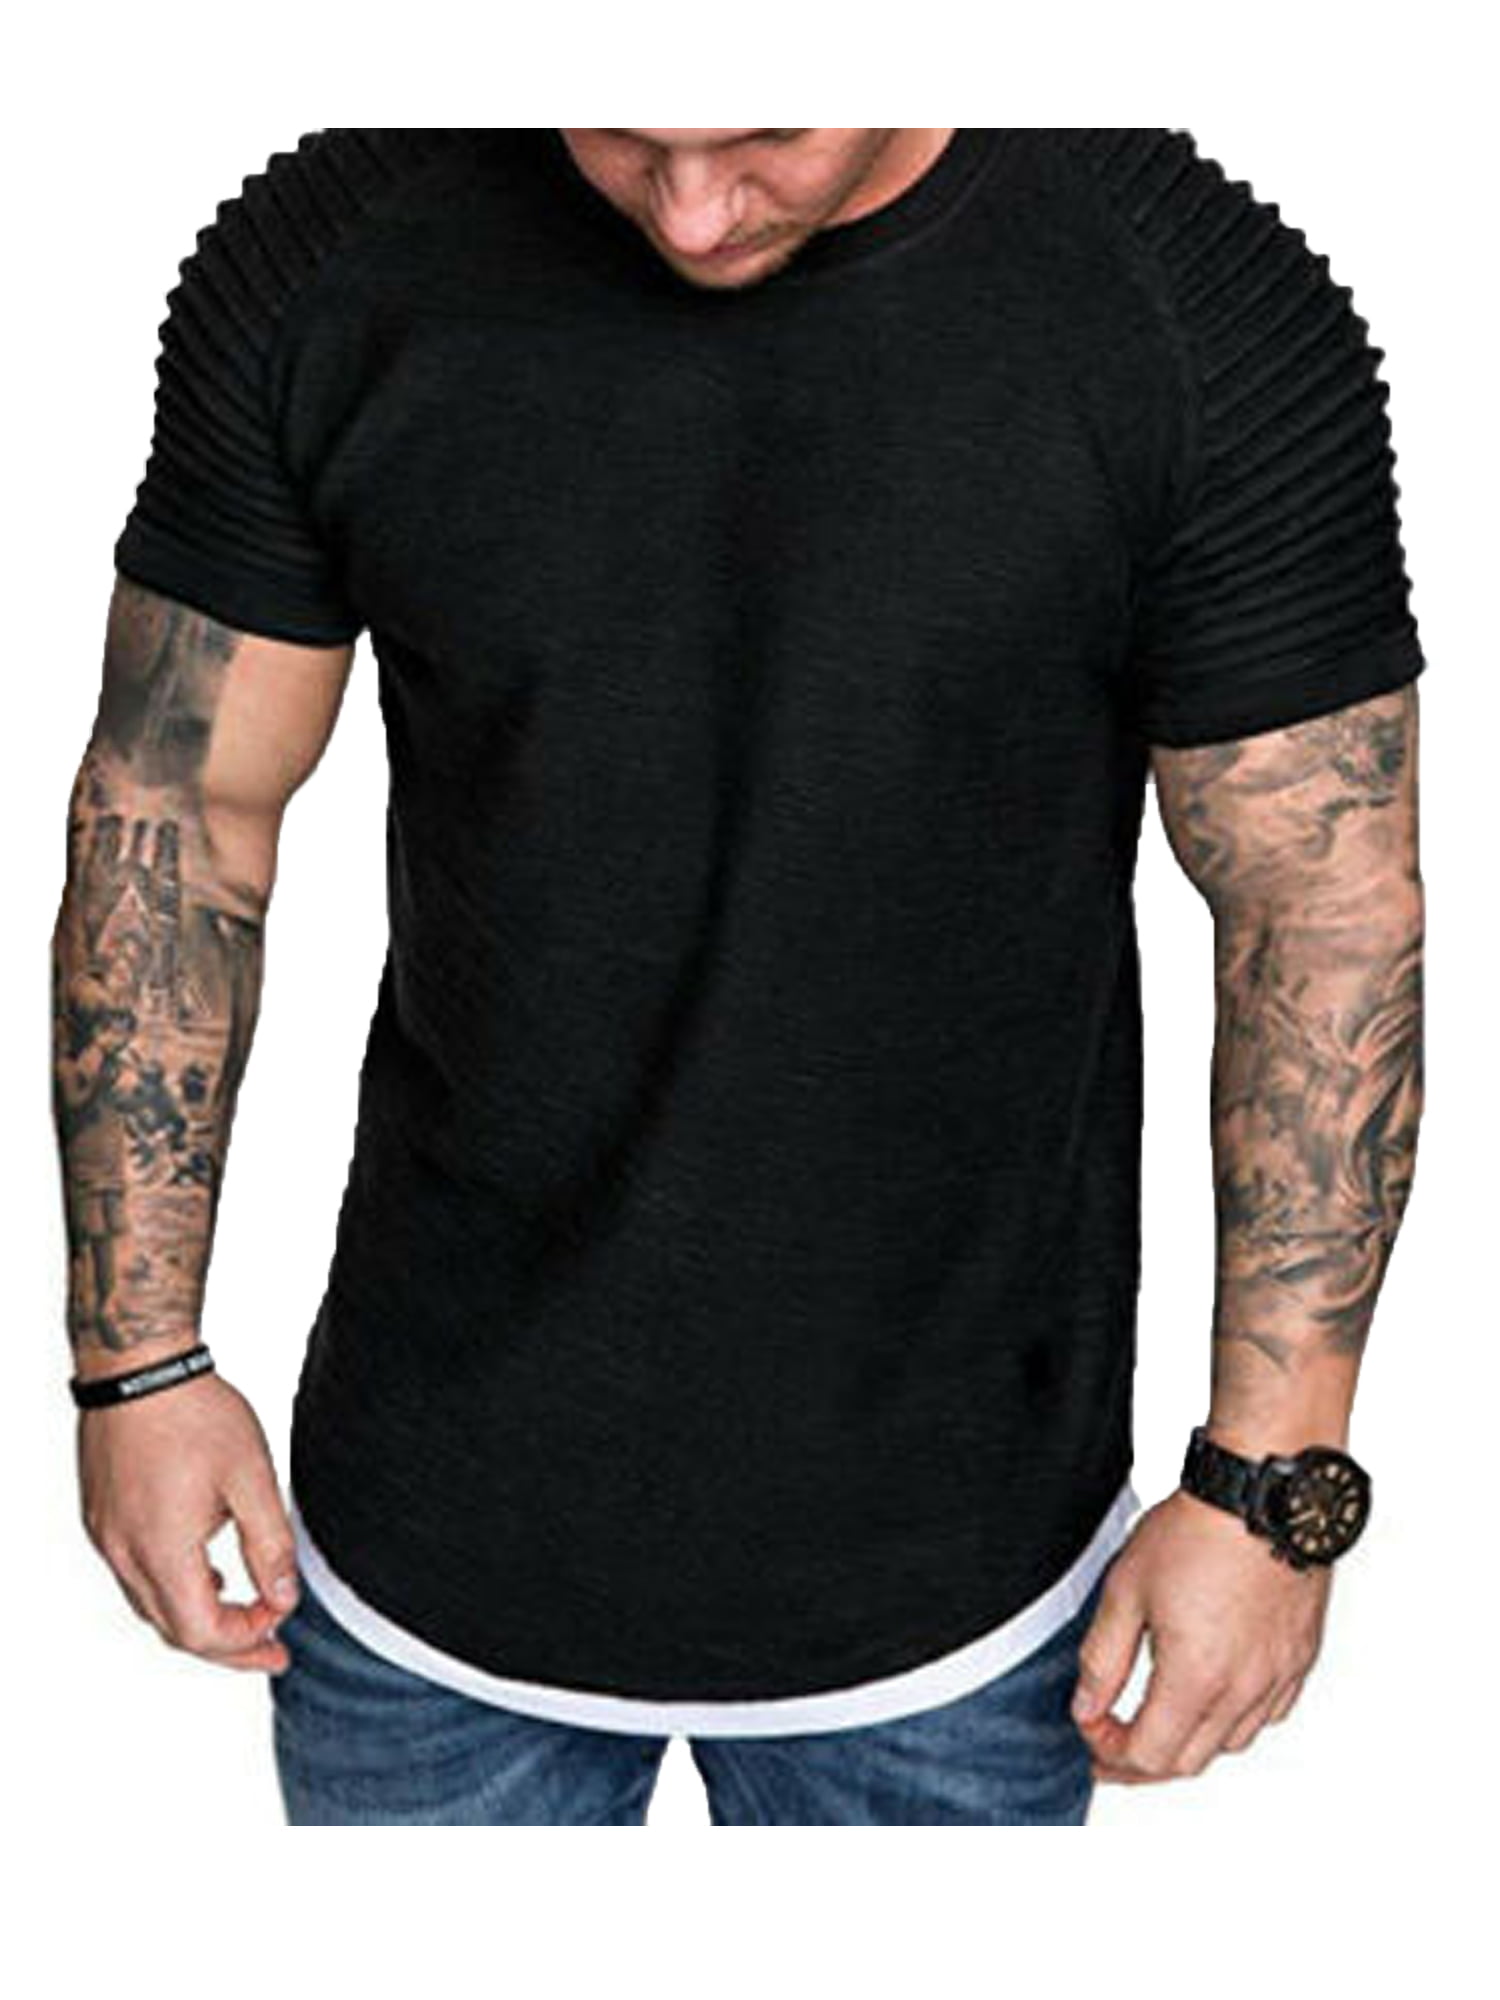 Diconna Men Short Sleeve T-shirt Wrinkled Casual Blouse Muscle Tee ...